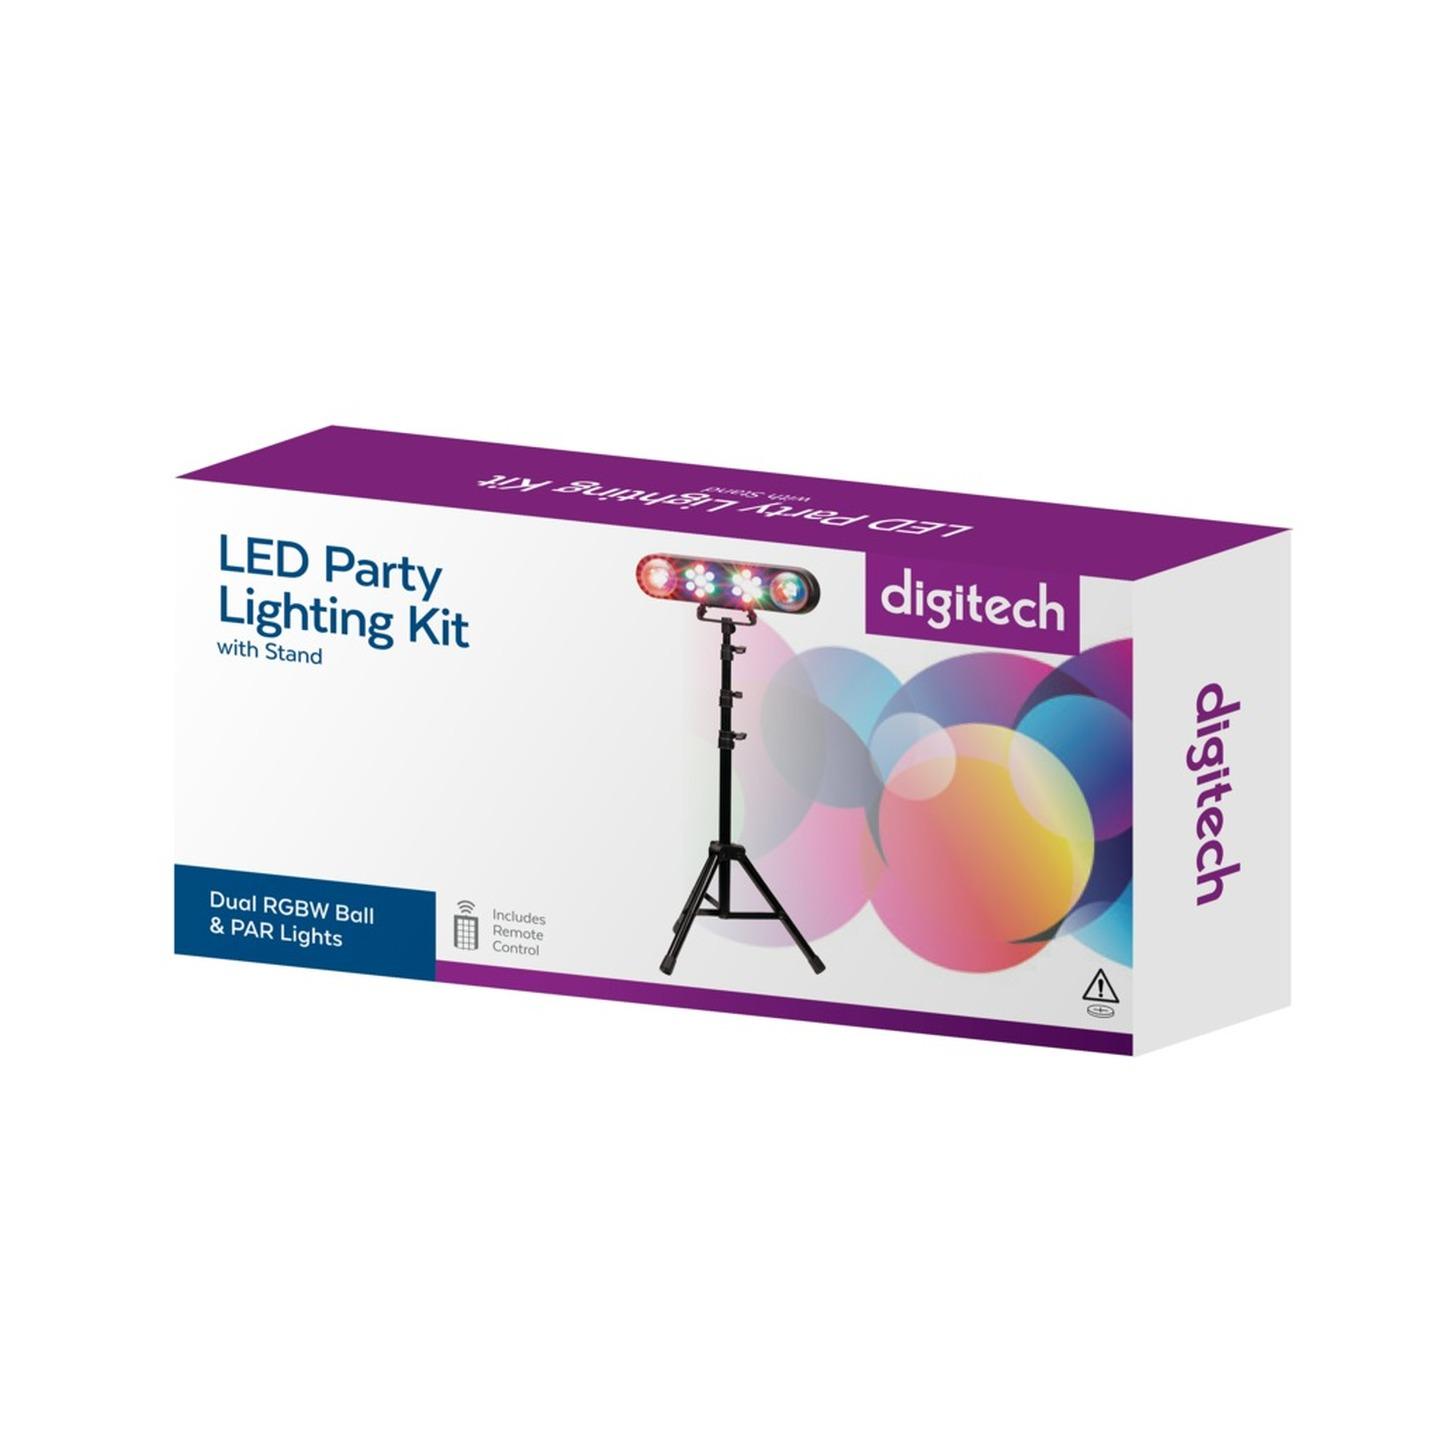 LED Party Lighting Kit with Stand